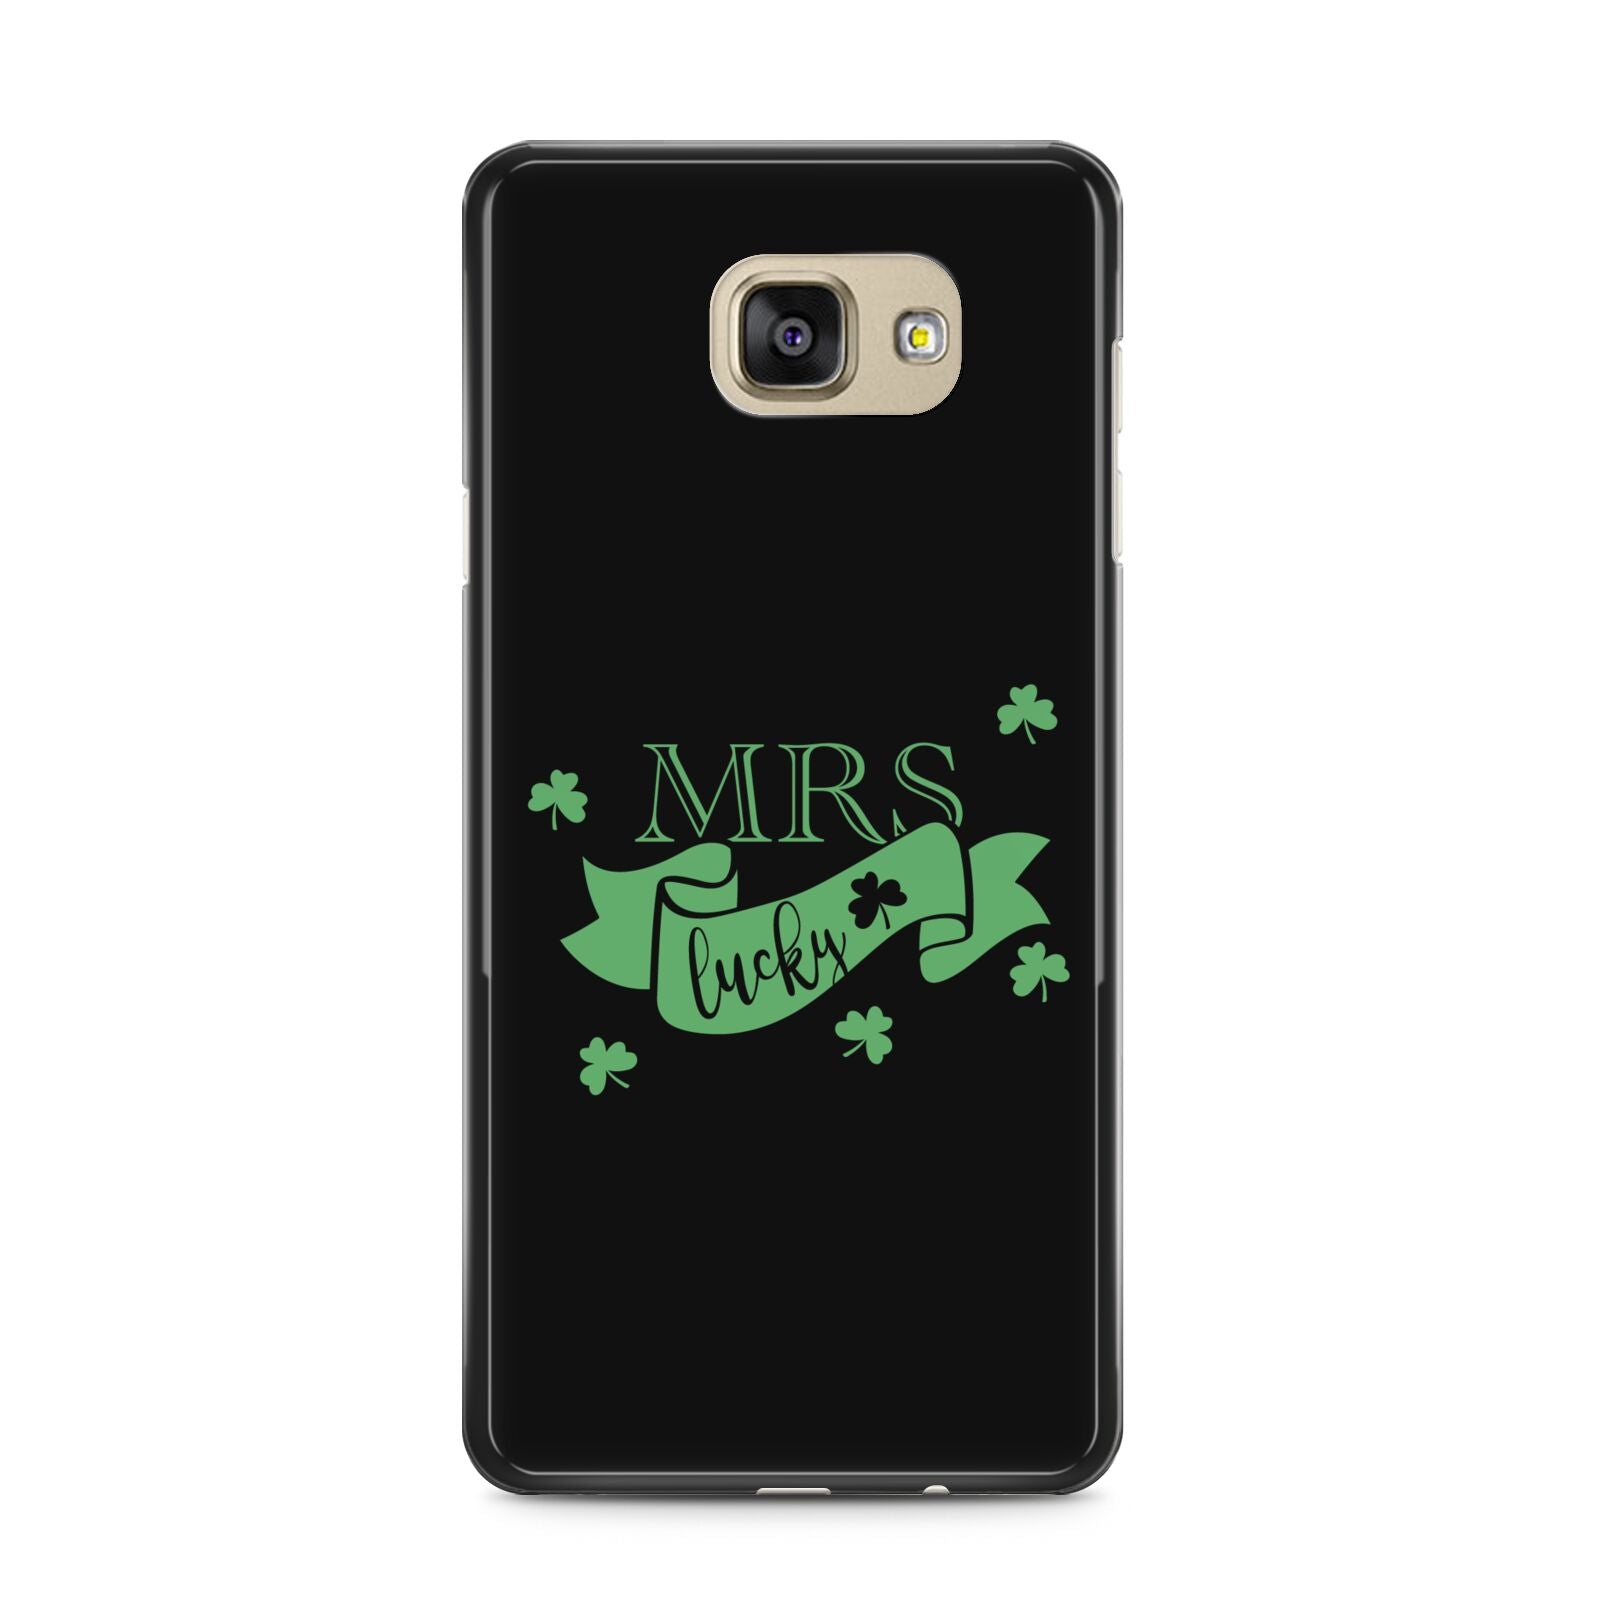 Mrs Lucky Samsung Galaxy A5 2016 Case on gold phone